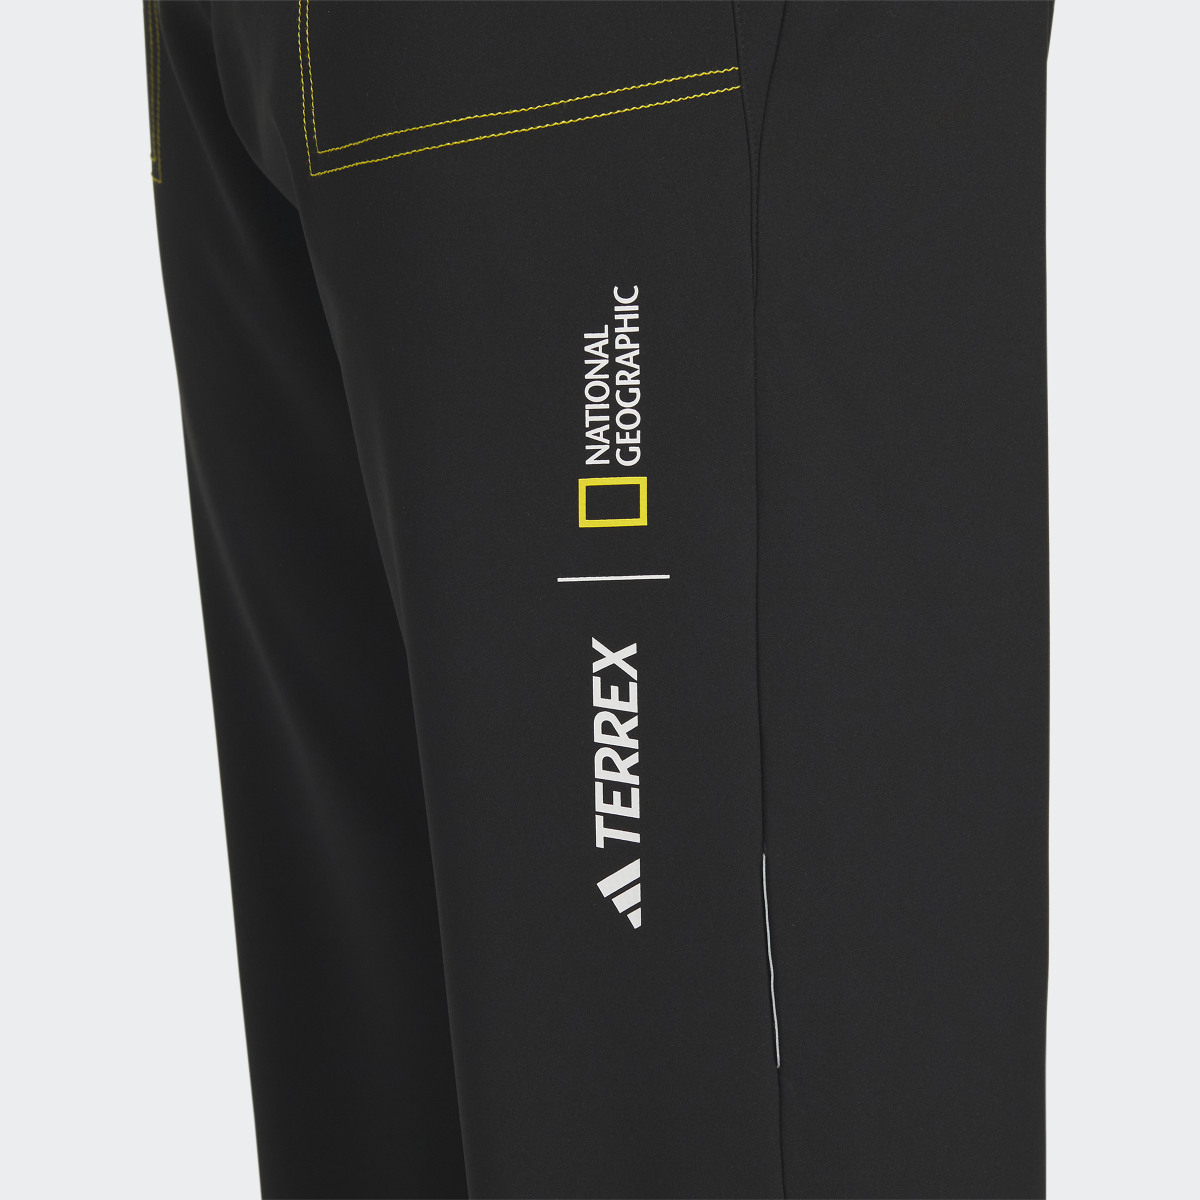 Adidas Pants National Geographic Soft Shell. 7